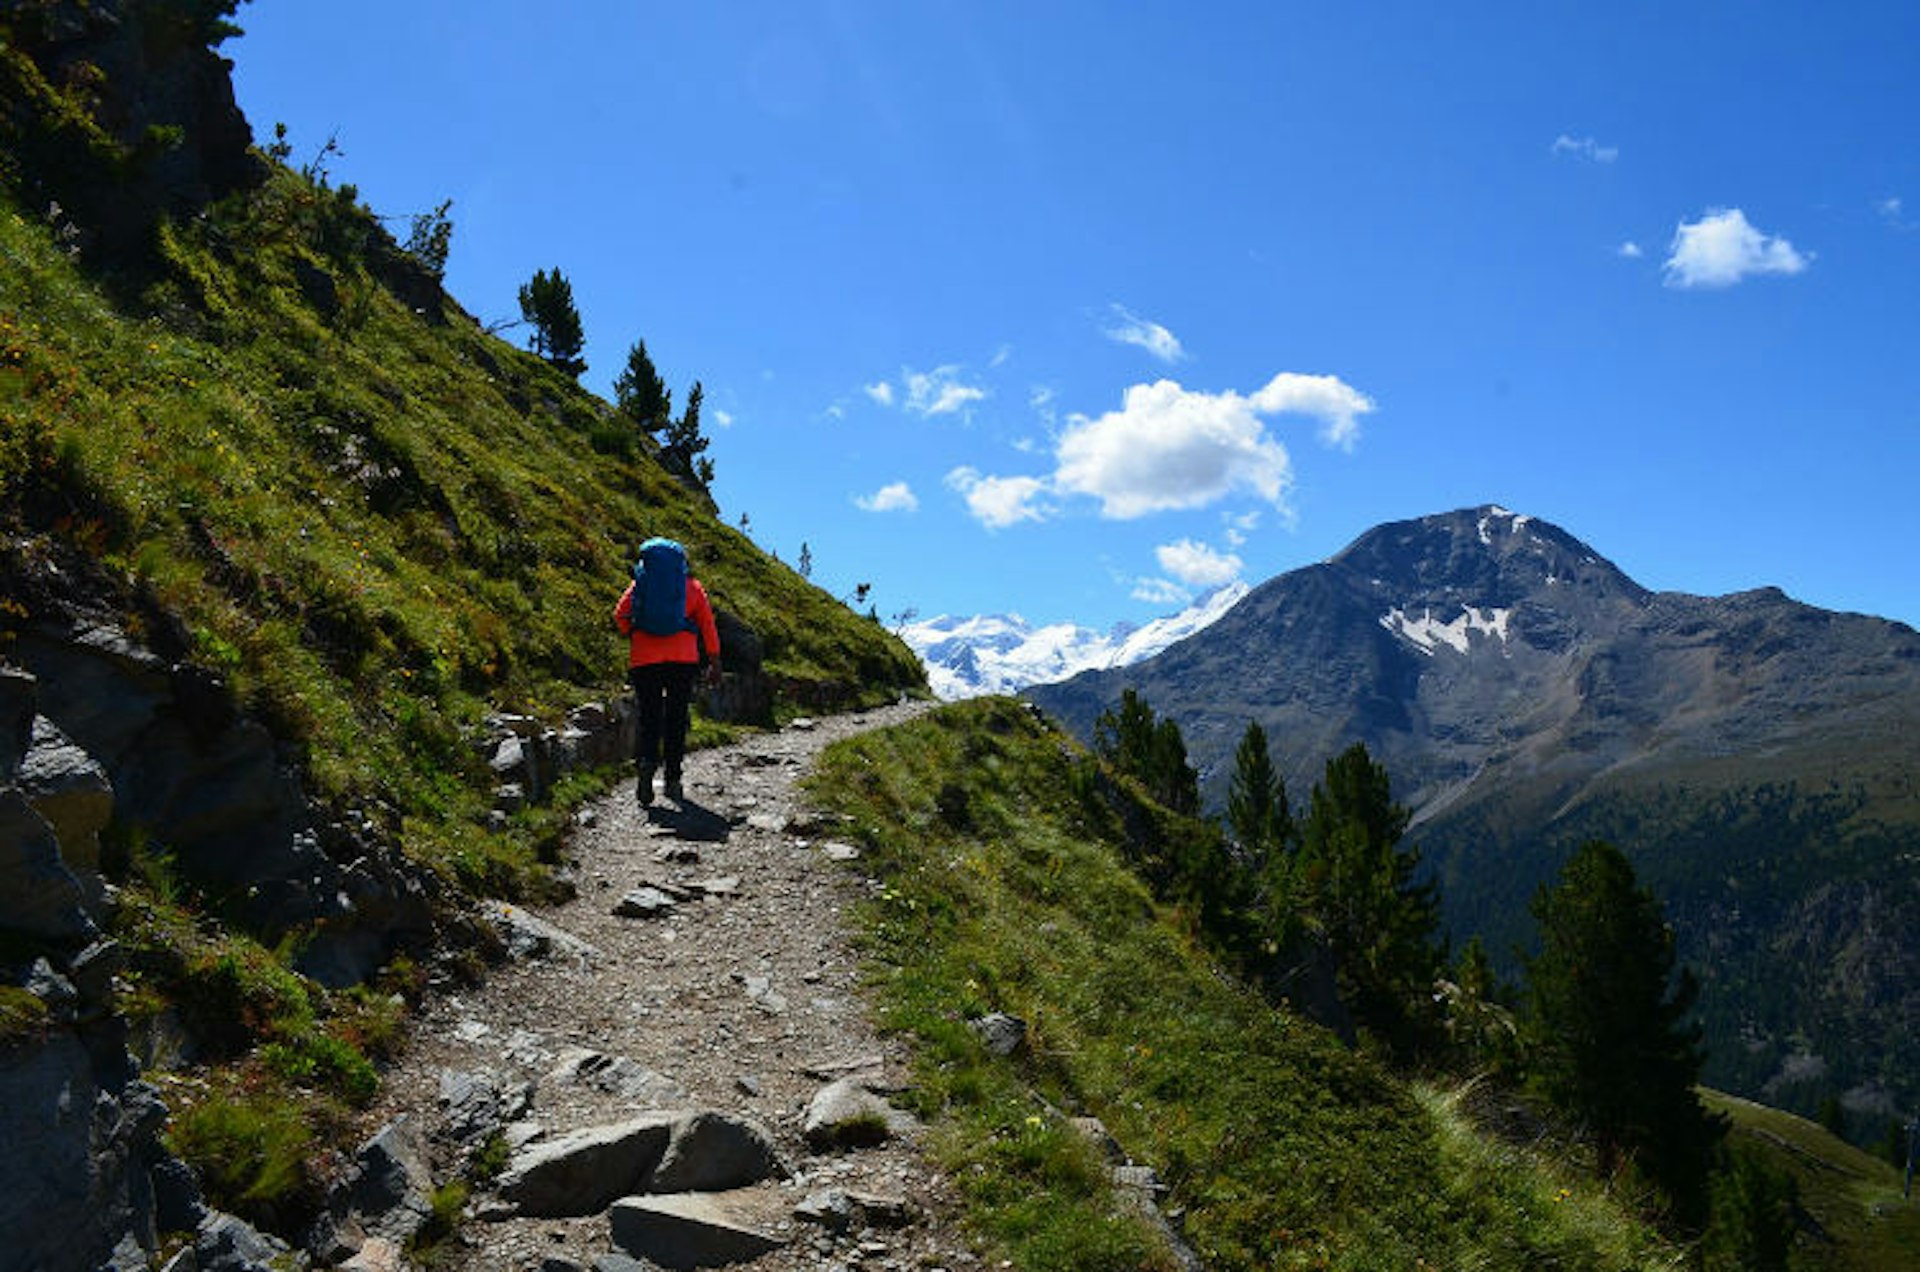 Summer hiking in the Swiss Alps with clear blue skies. Image by Kate Morgan/Lonely Planet